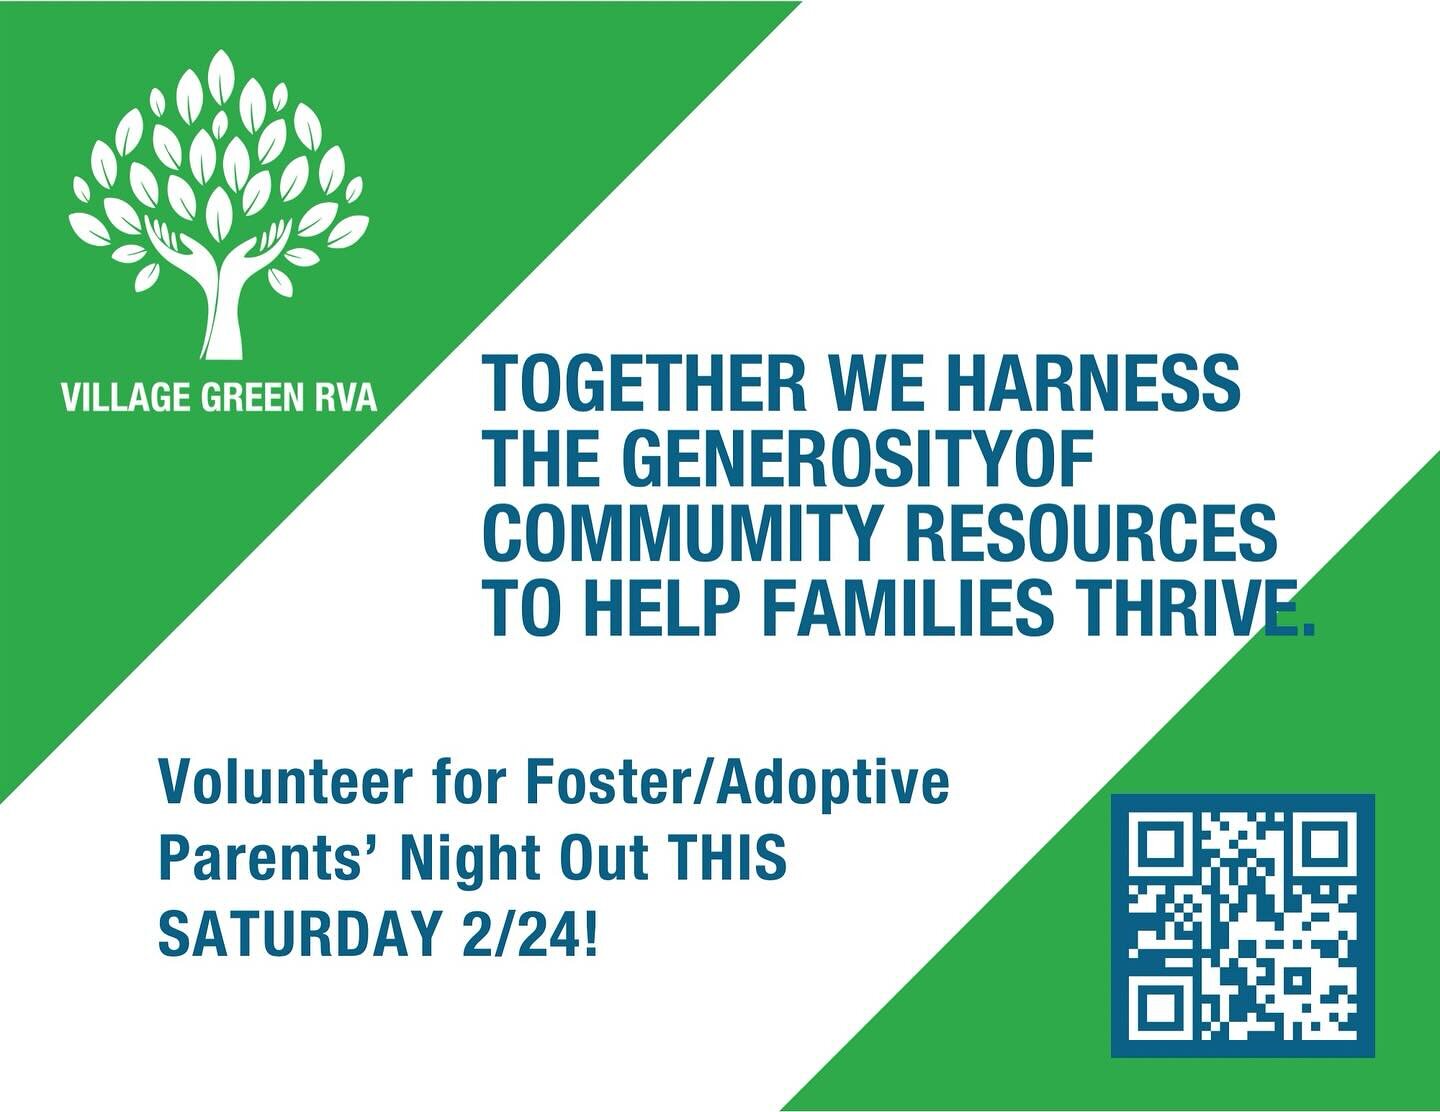 We have so many children and teens coming to Village Green RVA this Saturday 2/24 from 4:30-7:30pm! 

We&rsquo;d love to have YOU volunteer for our very first program offering! 

Link in bio to volunteer! 

#VillageGreenRVA #WeLoveRVA #RVA #HealthyFo